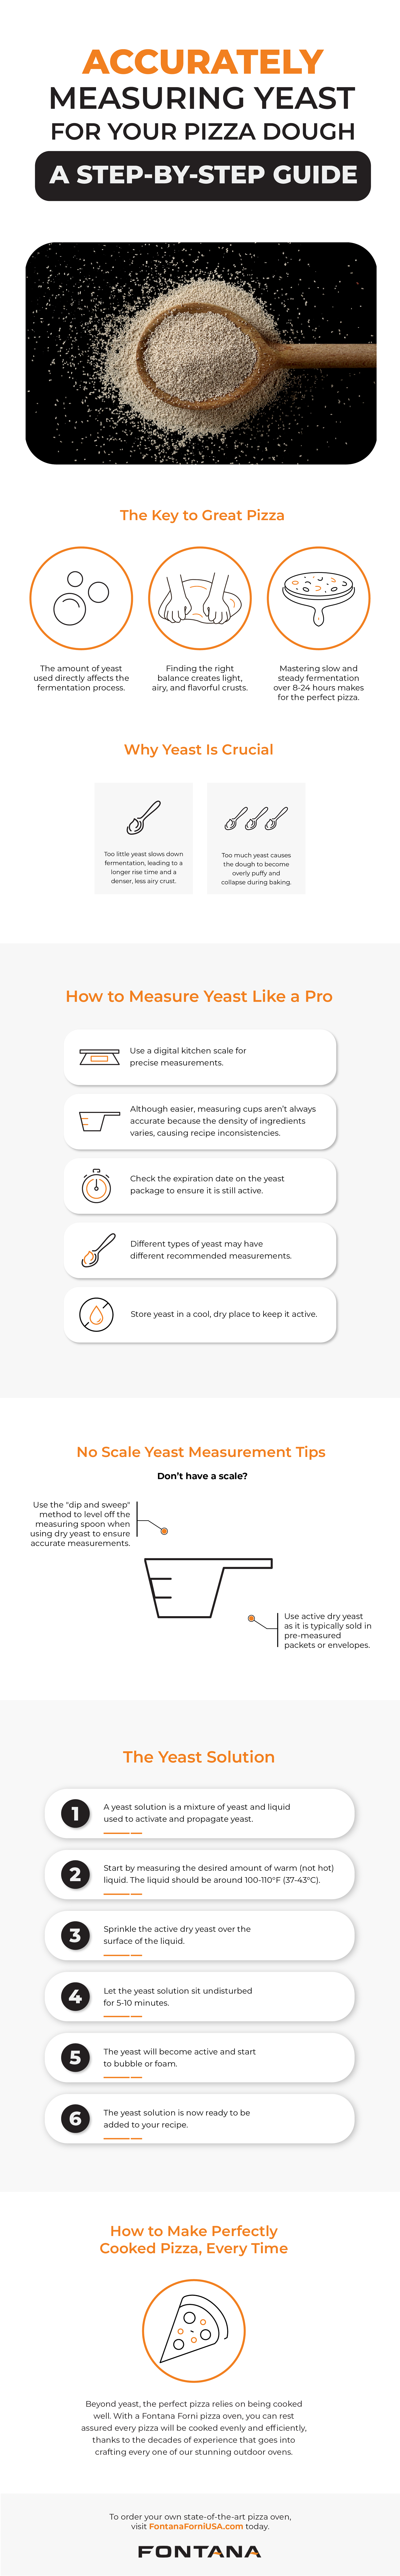 How to measure small amounts of yeast without a scale 